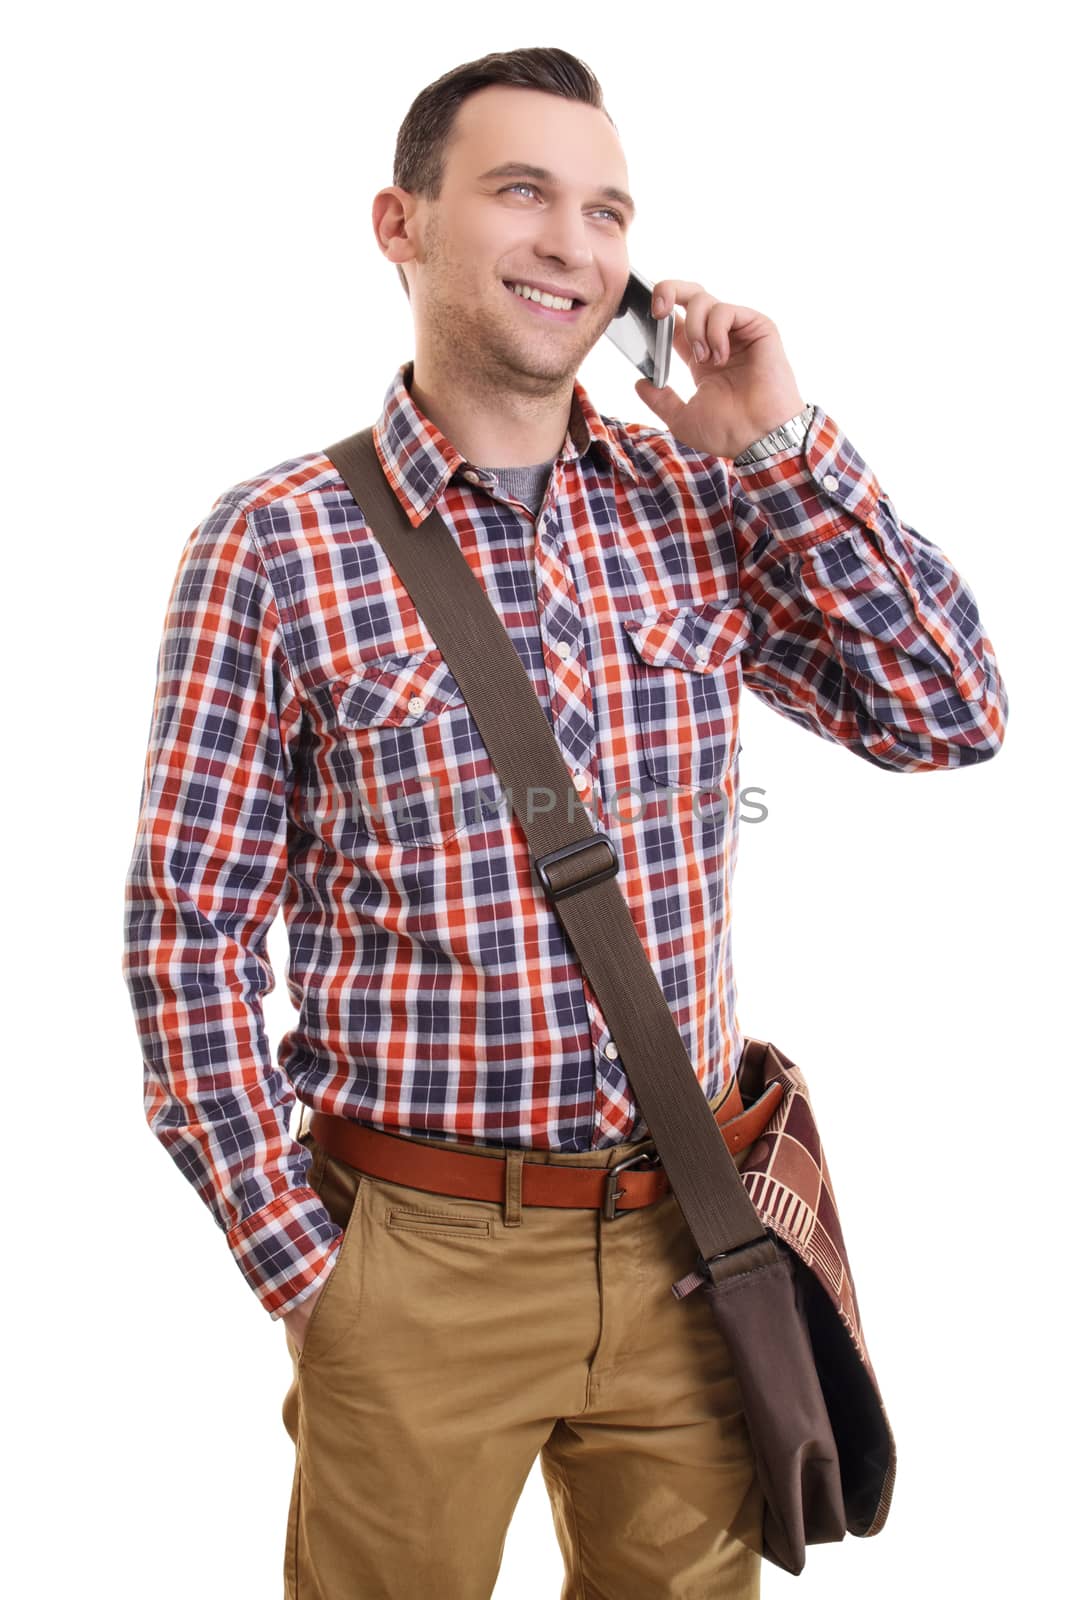 Communication concept. Portrait of a handsome smiling casual man in plaid shirt and a shoulder bag talking on mobile phone, isolated on a white background.